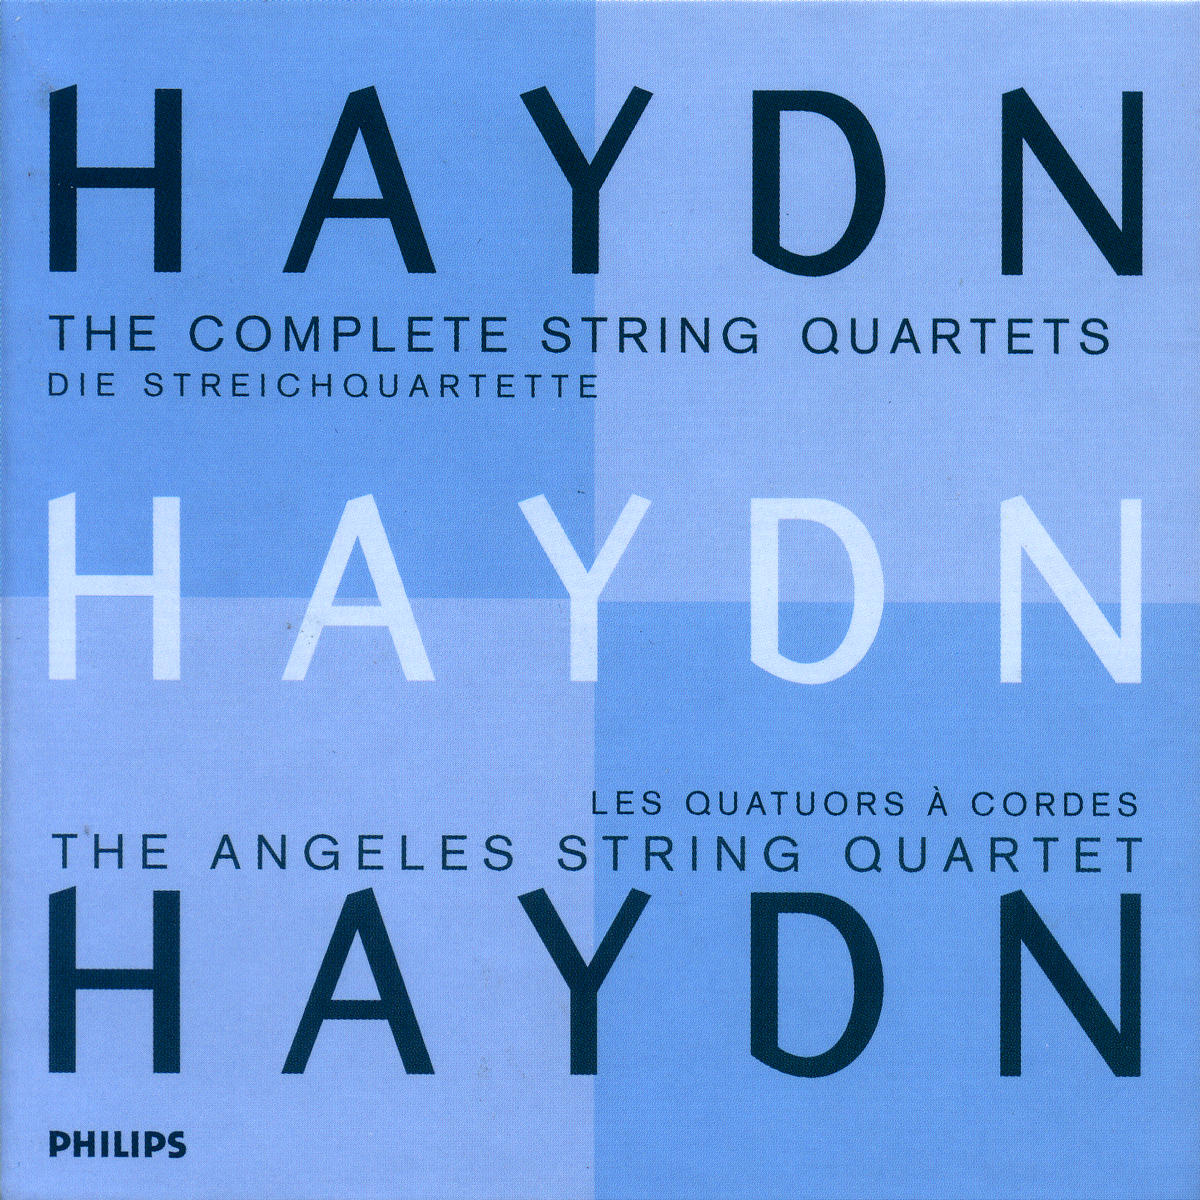 Product Family | HAYDN The String Quartets The Angeles String Quartet